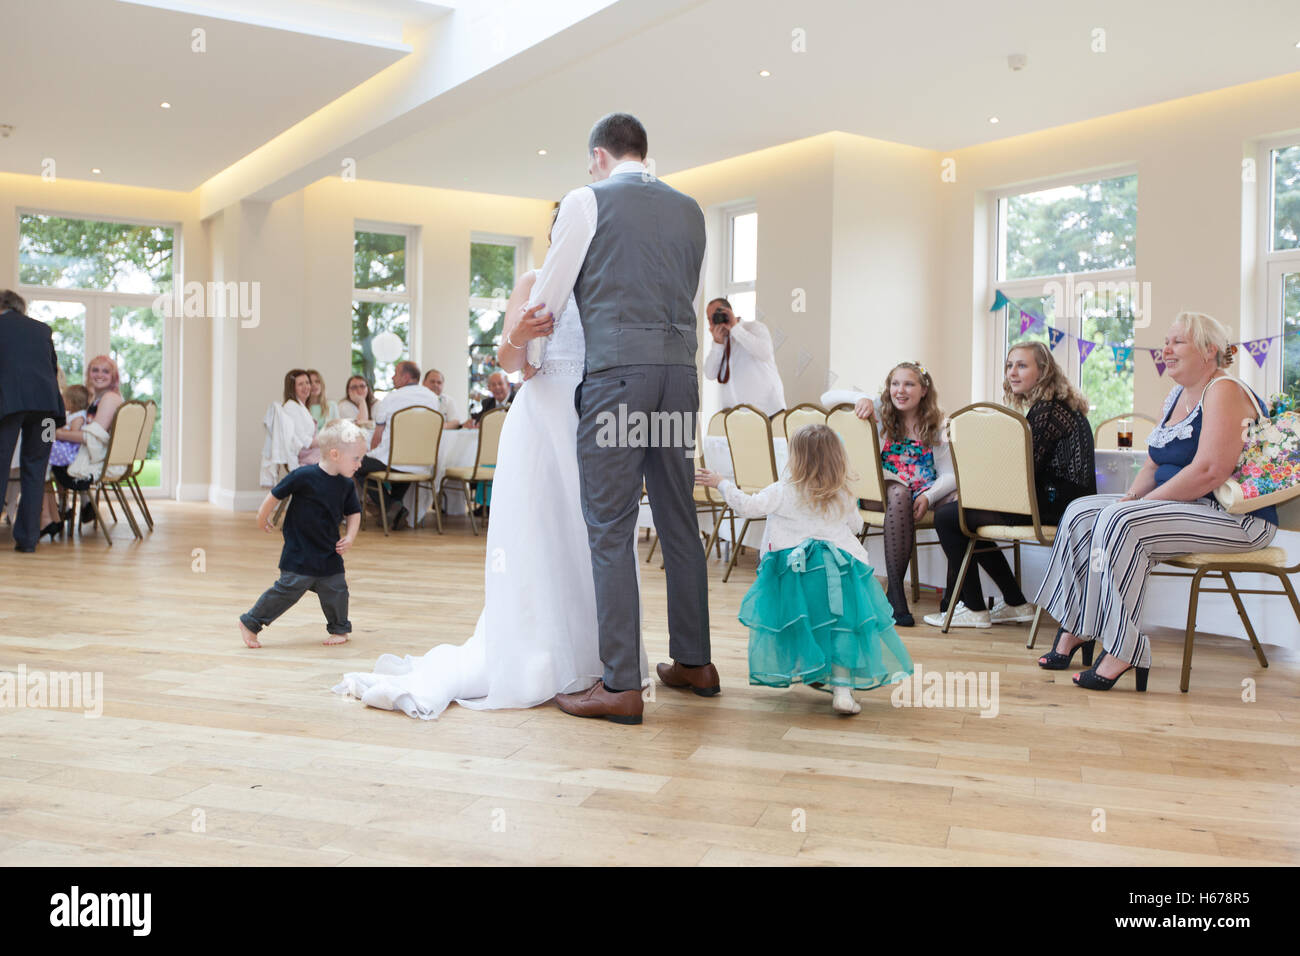 Bride and groom performing their first dance on their wedding day Stock Photo